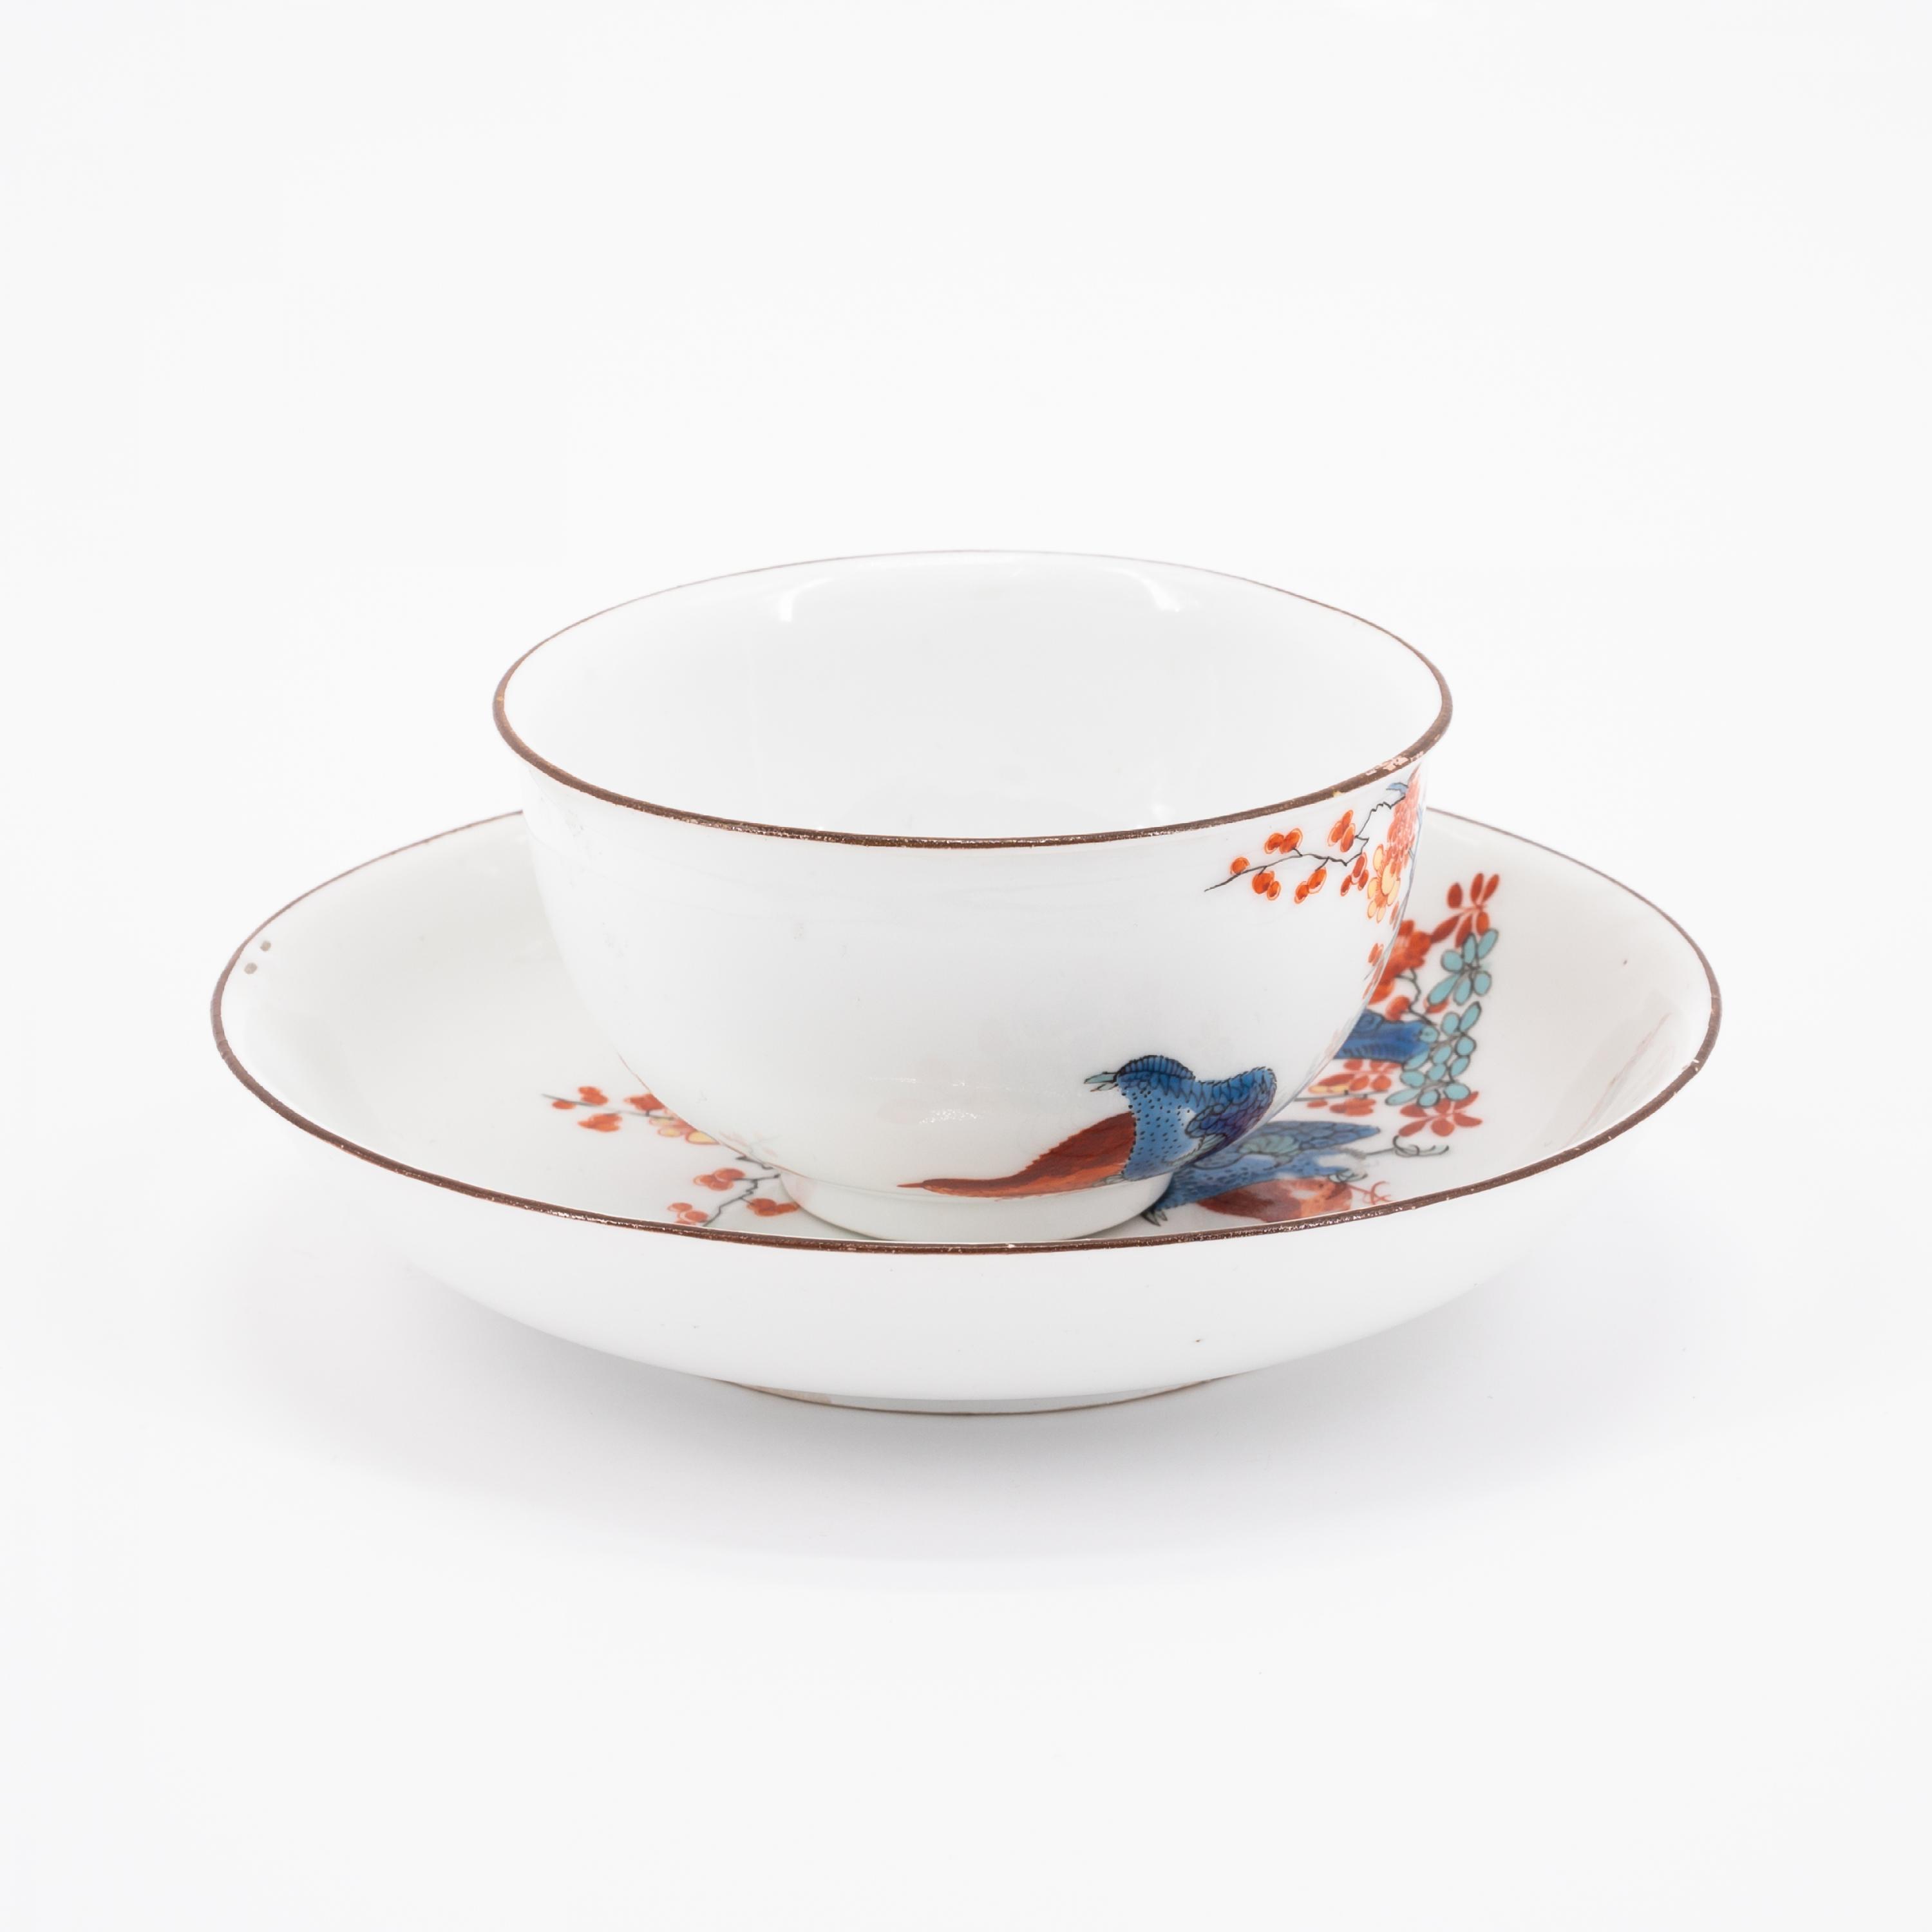 ONE PORCELAIN CUP AND SAUCER WITH QUAIL DECOR & TWO CUPS WITH PURPLE BACKGROUND AND BIRD DECOATIONS - Image 9 of 11